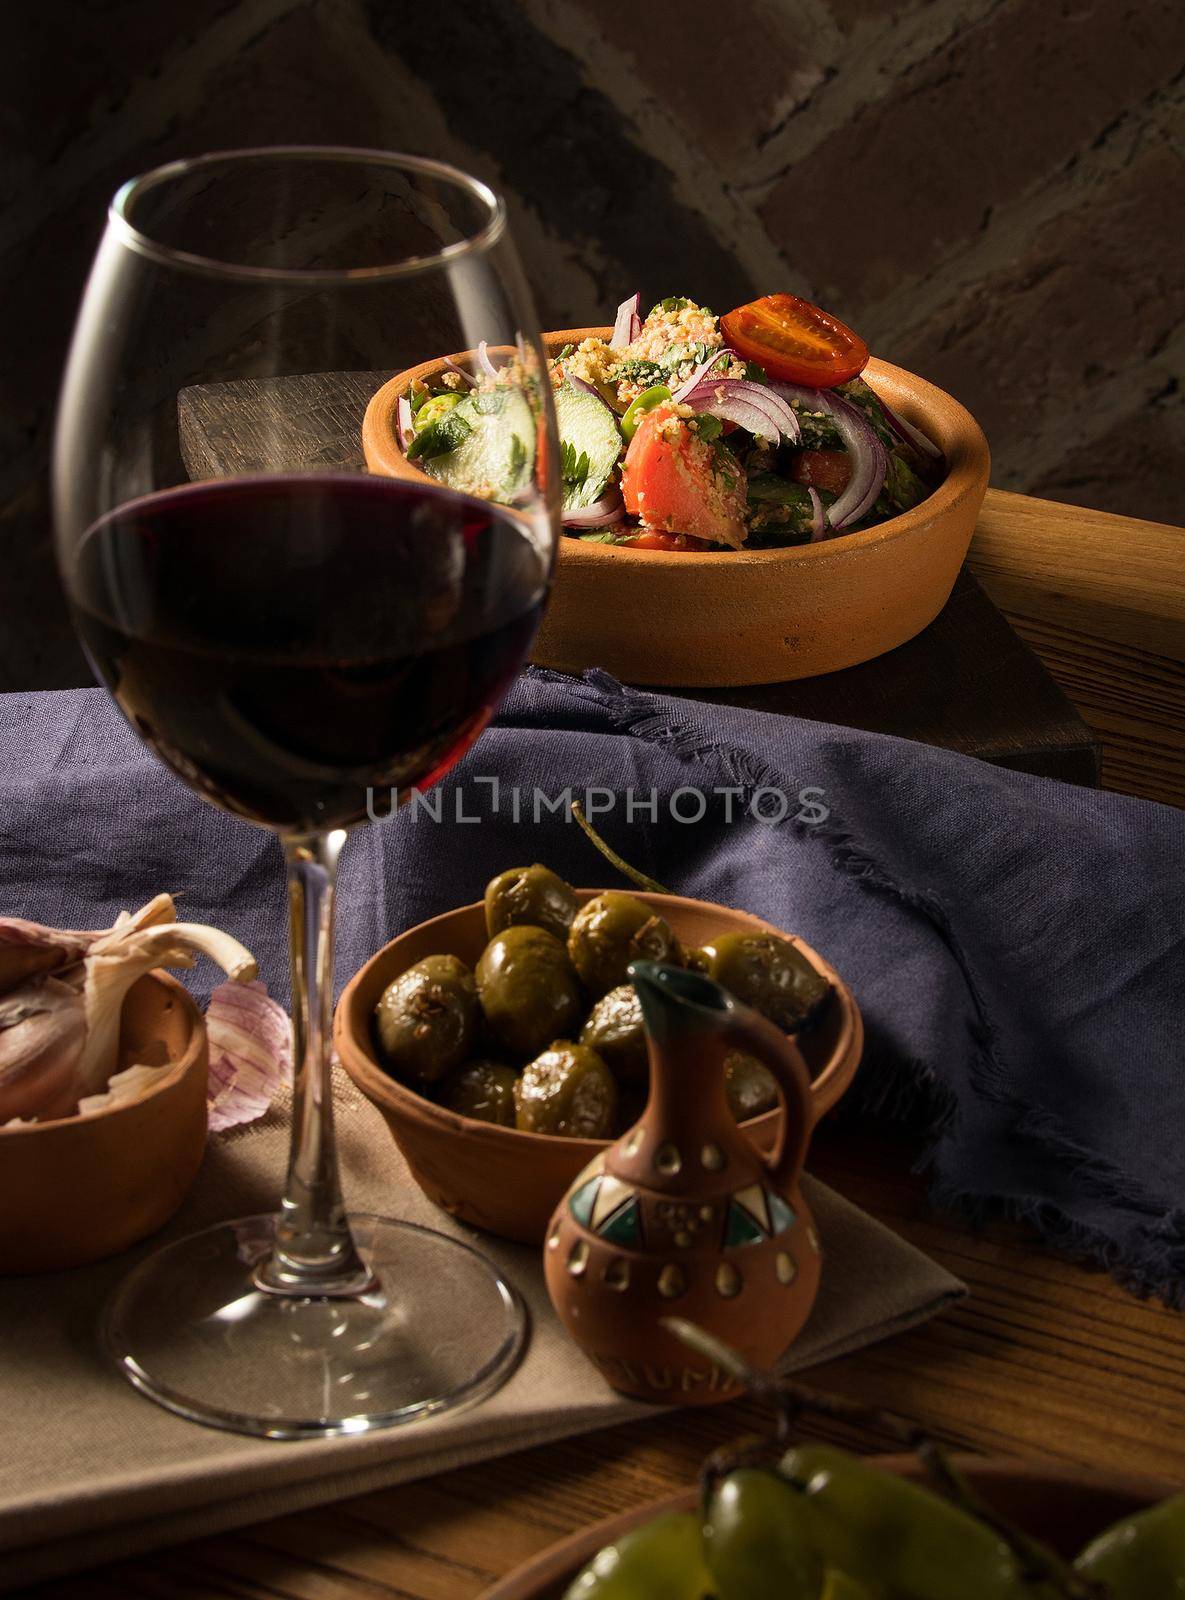 A glass of wine on a table with dishes